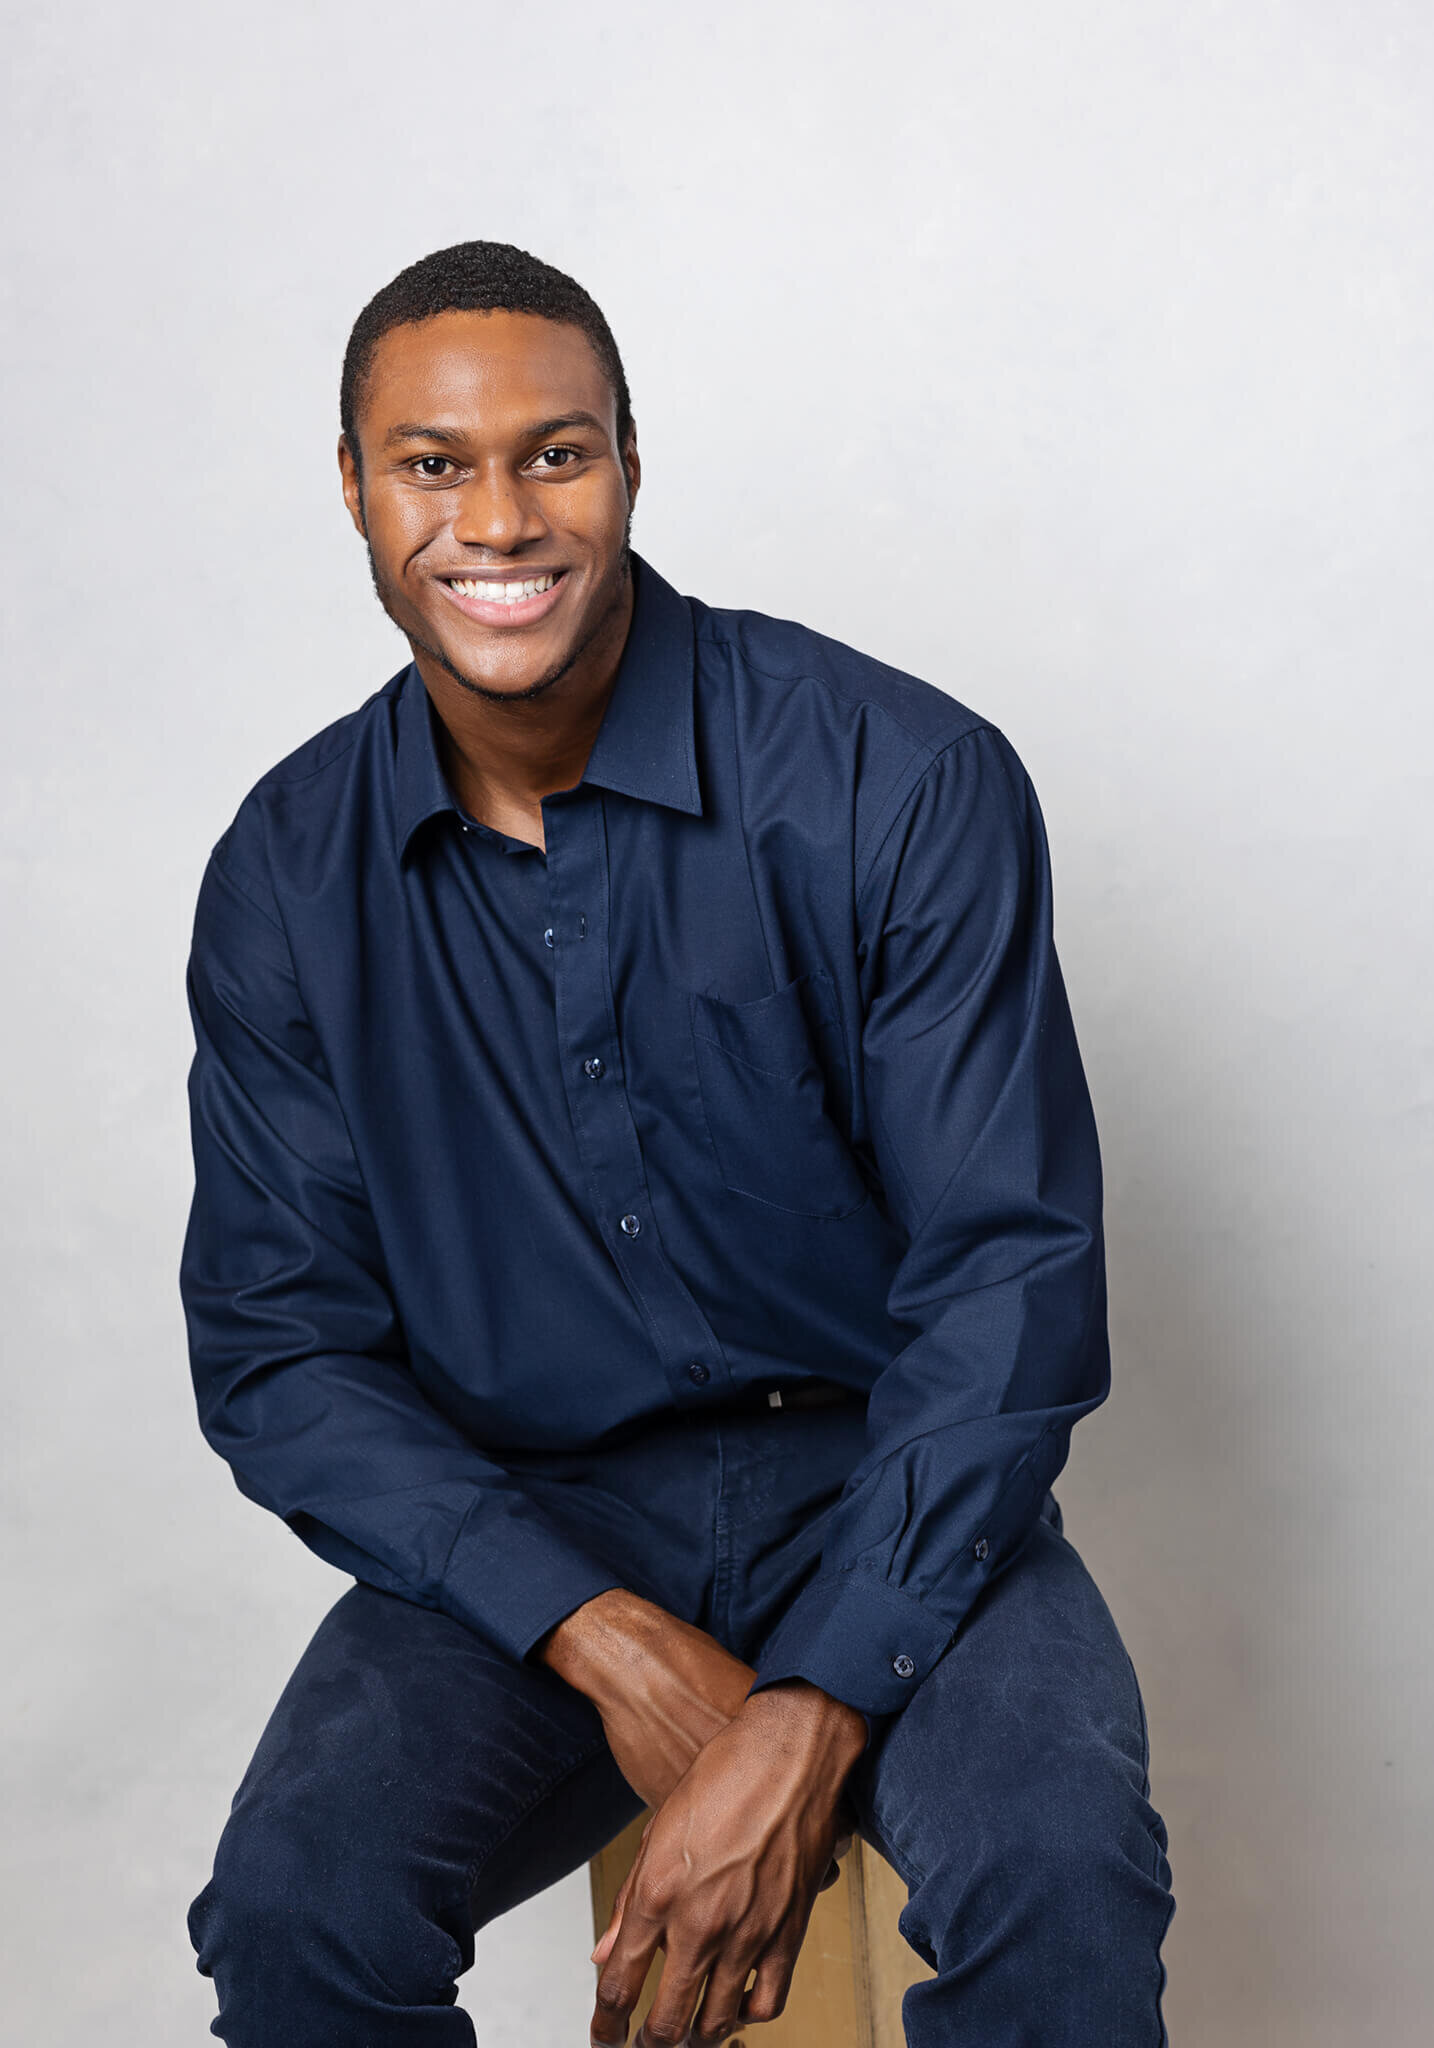 young professional is sitting on a chair and posing while looking relaxed and happy, he is wearing a blue shirt and jeans